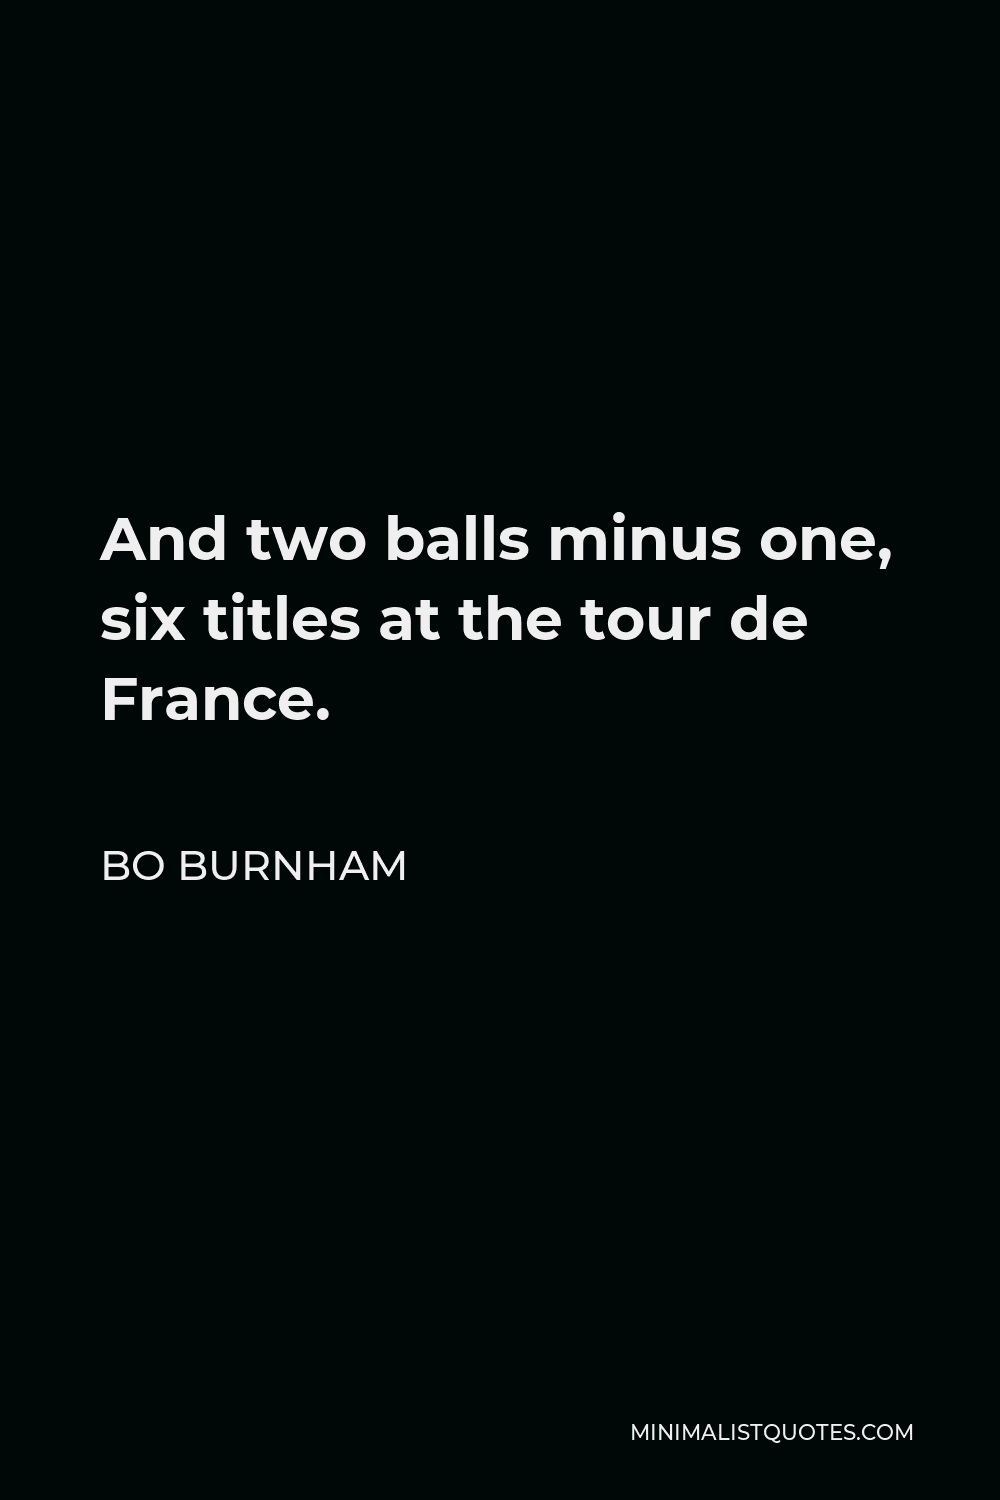 Bo Burnham Quote - And two balls minus one, six titles at the tour de France.